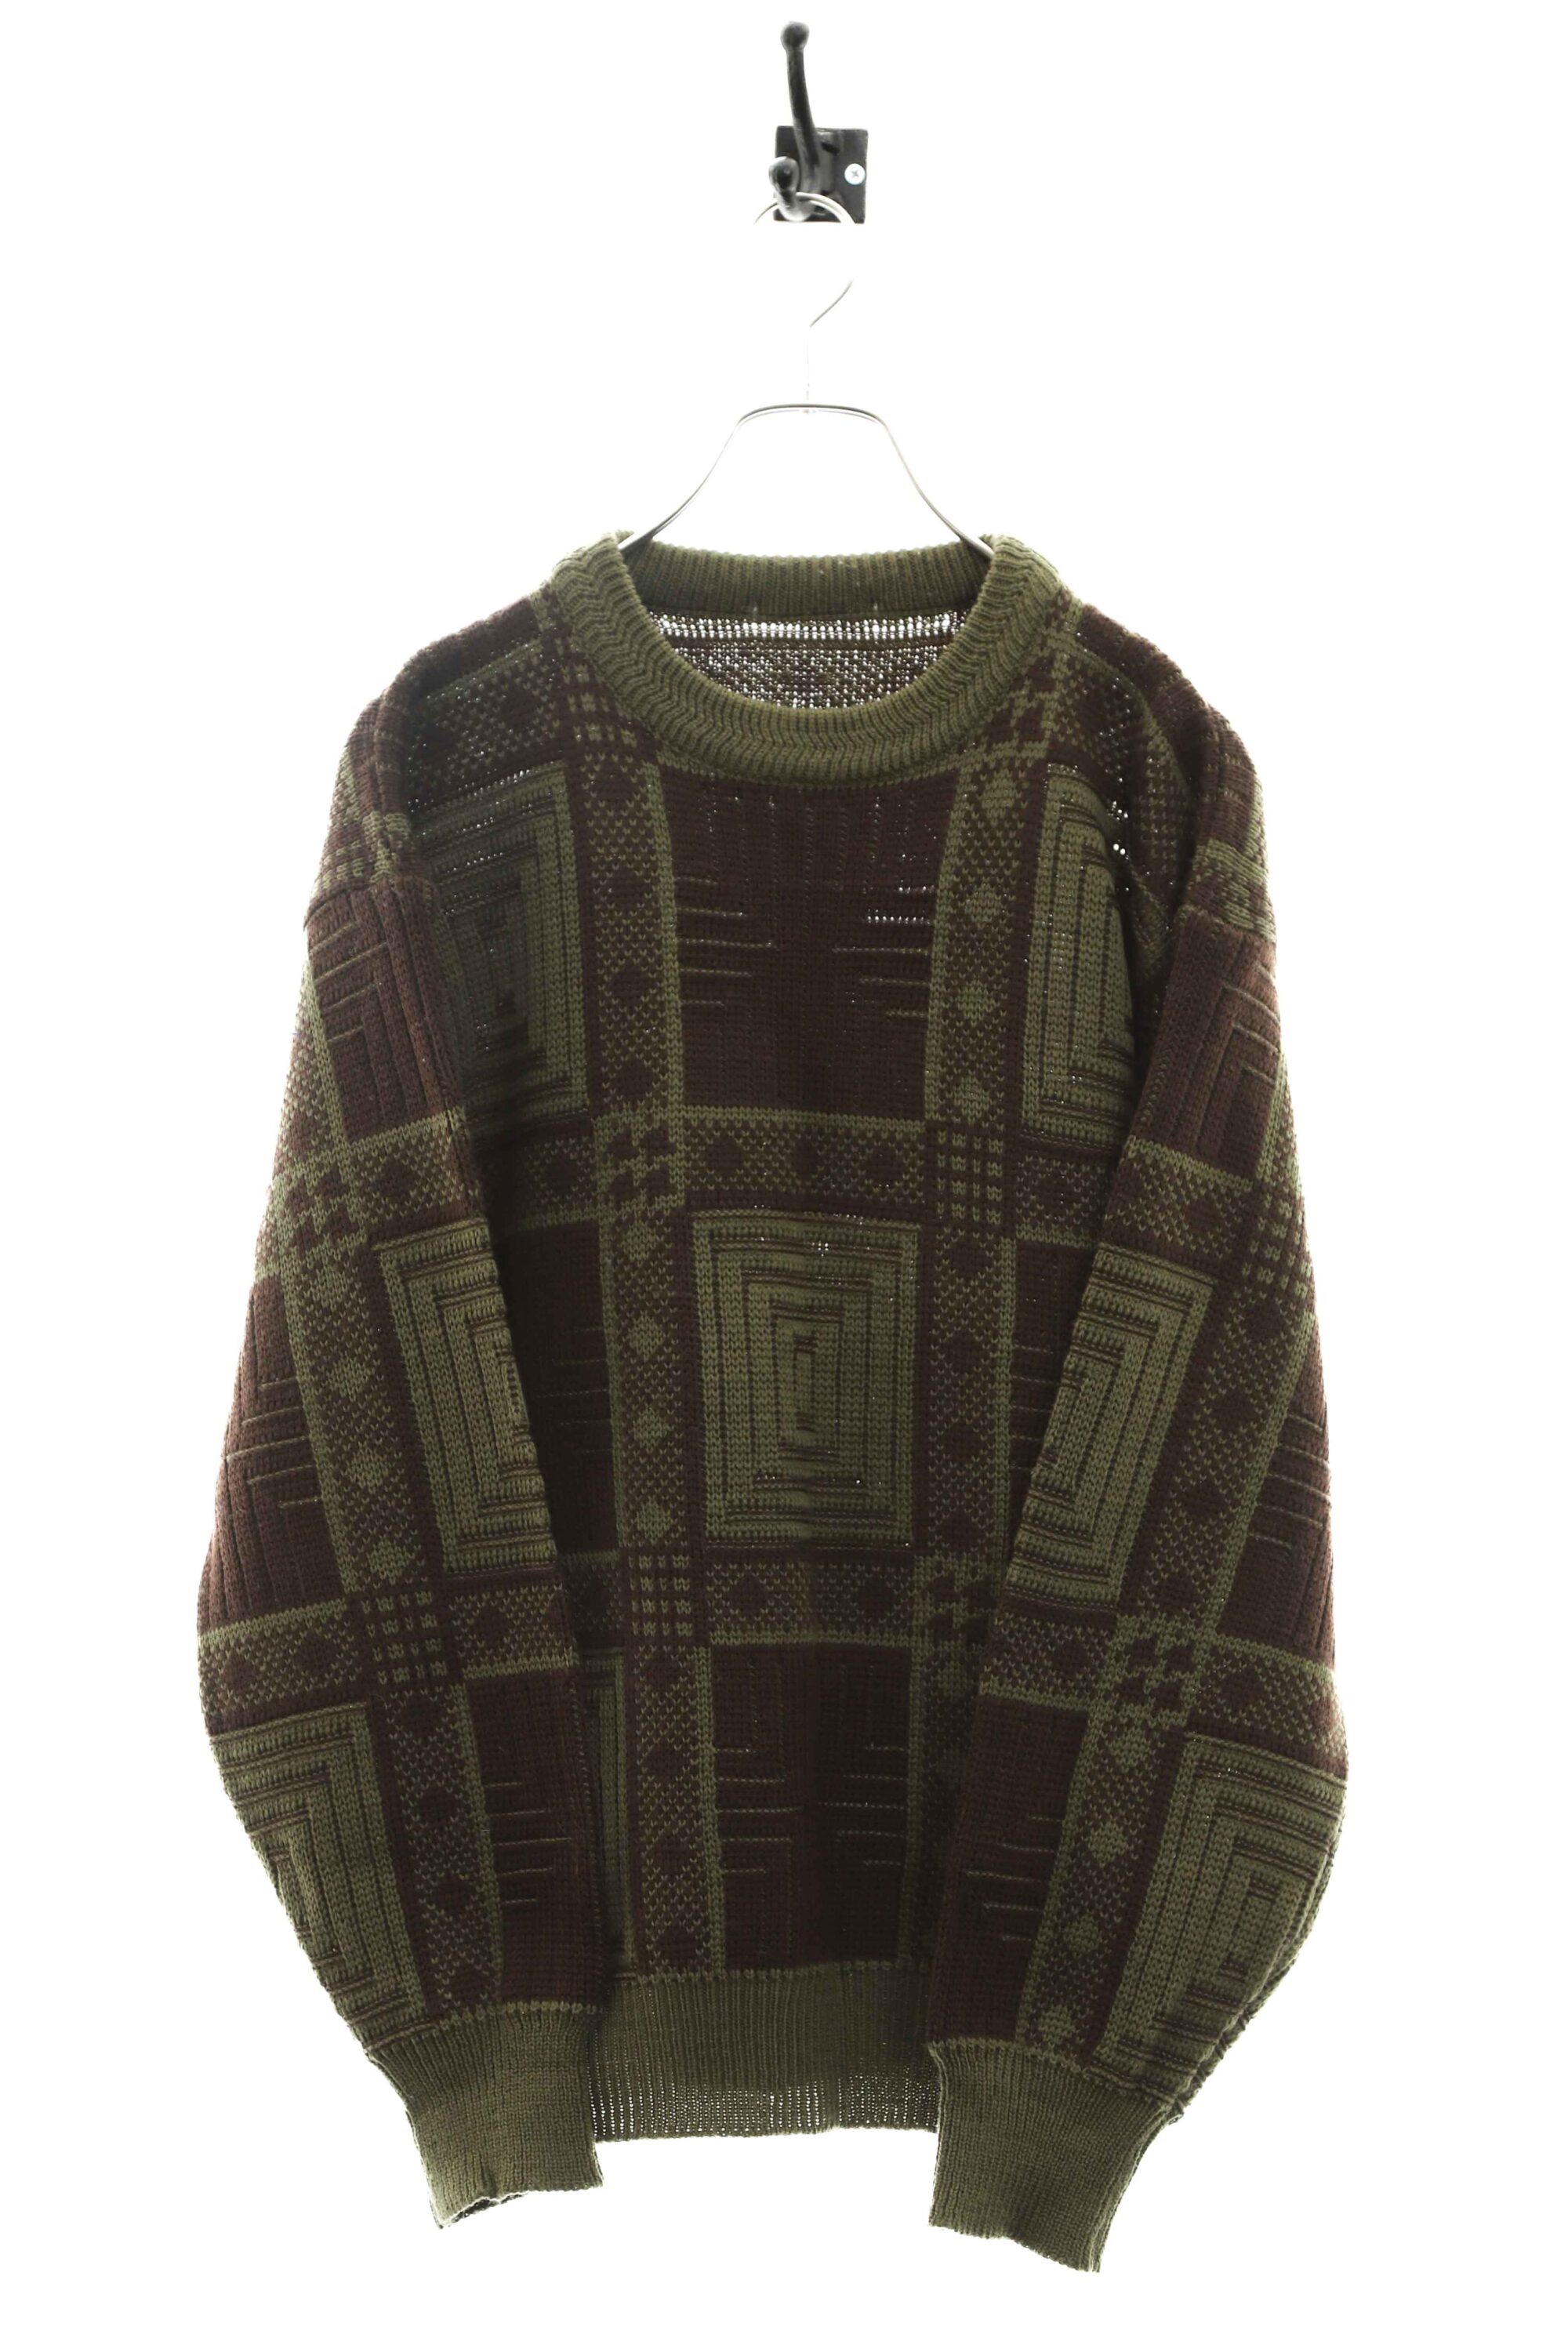 CanadianmadeVintage knit